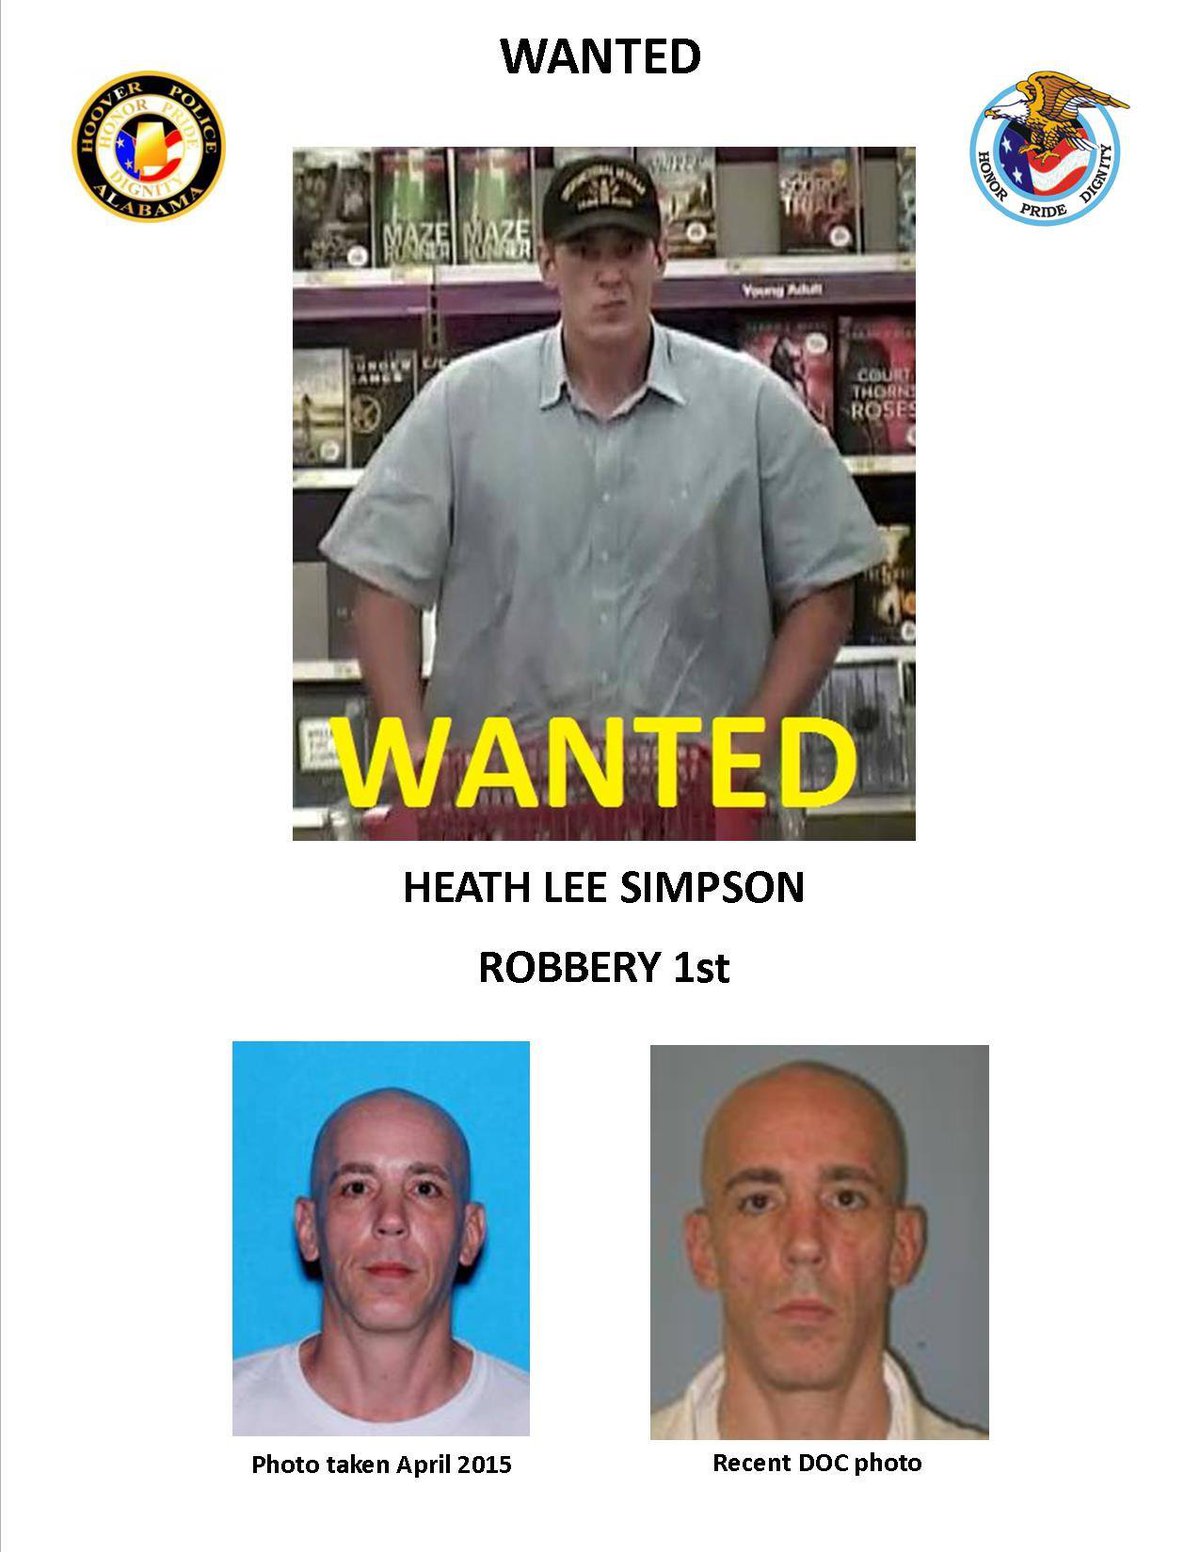 hoover-pd-identify-suspect-in-attempted-target-theft-hooversun